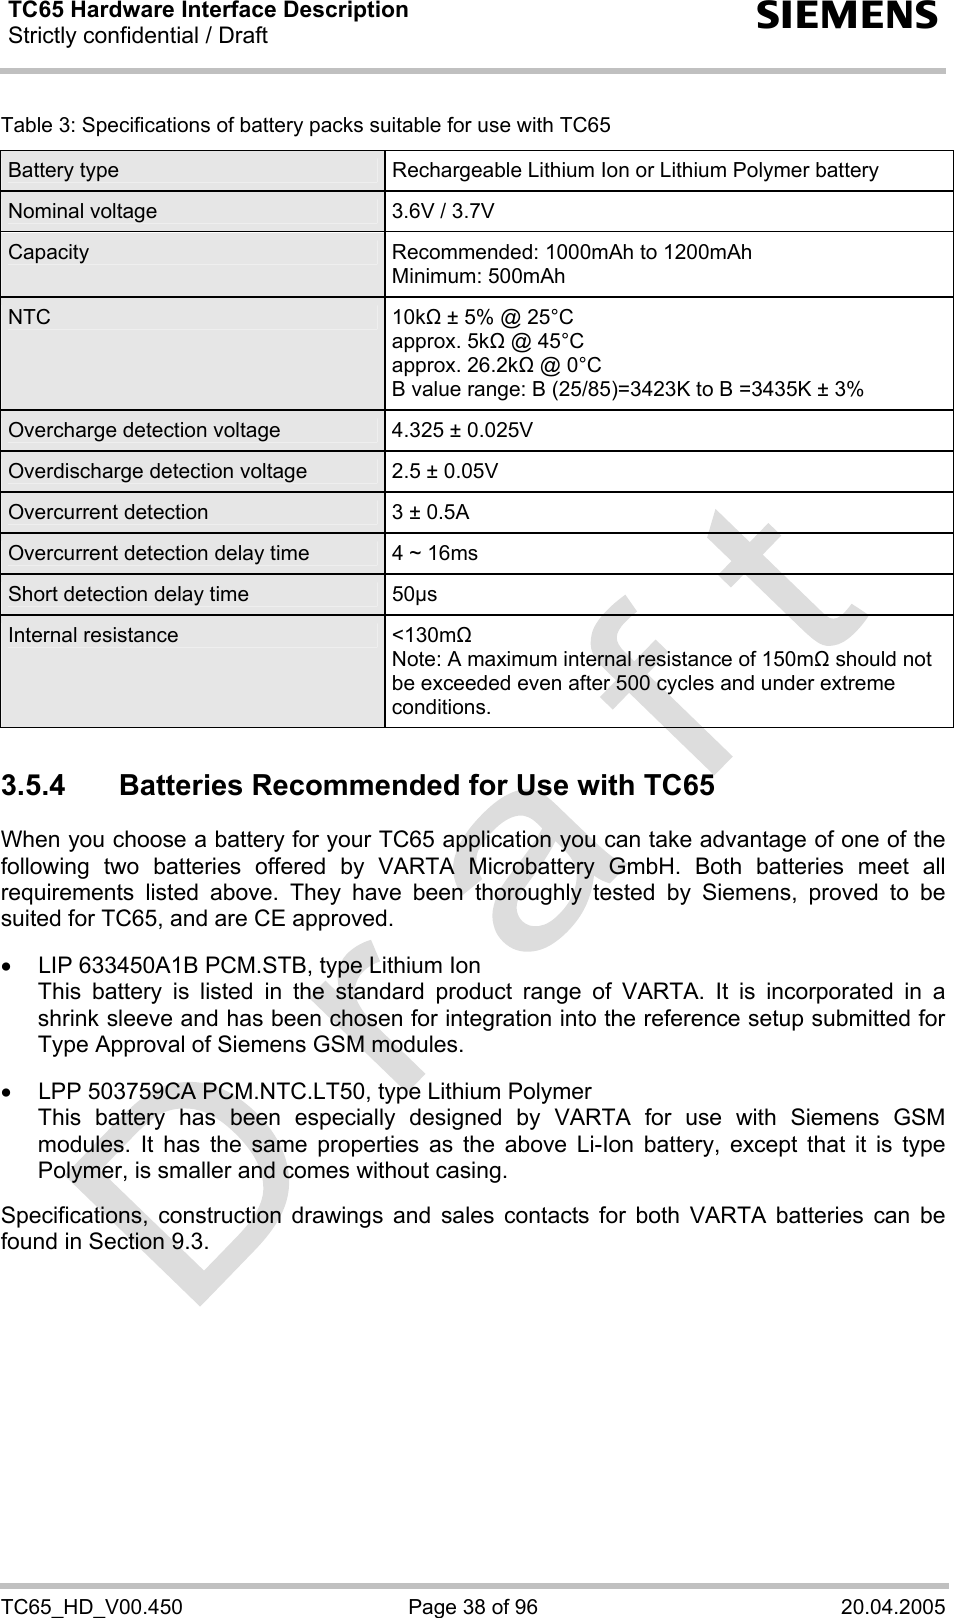 TC65 Hardware Interface Description Strictly confidential / Draft  s TC65_HD_V00.450  Page 38 of 96  20.04.2005 Table 3: Specifications of battery packs suitable for use with TC65 Battery type  Rechargeable Lithium Ion or Lithium Polymer battery Nominal voltage  3.6V / 3.7V Capacity  Recommended: 1000mAh to 1200mAh Minimum: 500mAh NTC 10k ± 5% @ 25°C approx. 5k @ 45°C approx. 26.2k @ 0°C B value range: B (25/85)=3423K to B =3435K ± 3% Overcharge detection voltage  4.325 ± 0.025V Overdischarge detection voltage  2.5 ± 0.05V Overcurrent detection  3 ± 0.5A Overcurrent detection delay time  4 ~ 16ms Short detection delay time  50µs Internal resistance  &lt;130m Note: A maximum internal resistance of 150m should not be exceeded even after 500 cycles and under extreme conditions.  3.5.4  Batteries Recommended for Use with TC65 When you choose a battery for your TC65 application you can take advantage of one of the following two batteries offered by VARTA Microbattery GmbH. Both batteries meet all requirements listed above. They have been thoroughly tested by Siemens, proved to be suited for TC65, and are CE approved.  •  LIP 633450A1B PCM.STB, type Lithium Ion This battery is listed in the standard product range of VARTA. It is incorporated in a shrink sleeve and has been chosen for integration into the reference setup submitted for Type Approval of Siemens GSM modules.  •  LPP 503759CA PCM.NTC.LT50, type Lithium Polymer This battery has been especially designed by VARTA for use with Siemens GSM modules. It has the same properties as the above Li-Ion battery, except that it is type Polymer, is smaller and comes without casing.  Specifications, construction drawings and sales contacts for both VARTA batteries can be found in Section 9.3.  